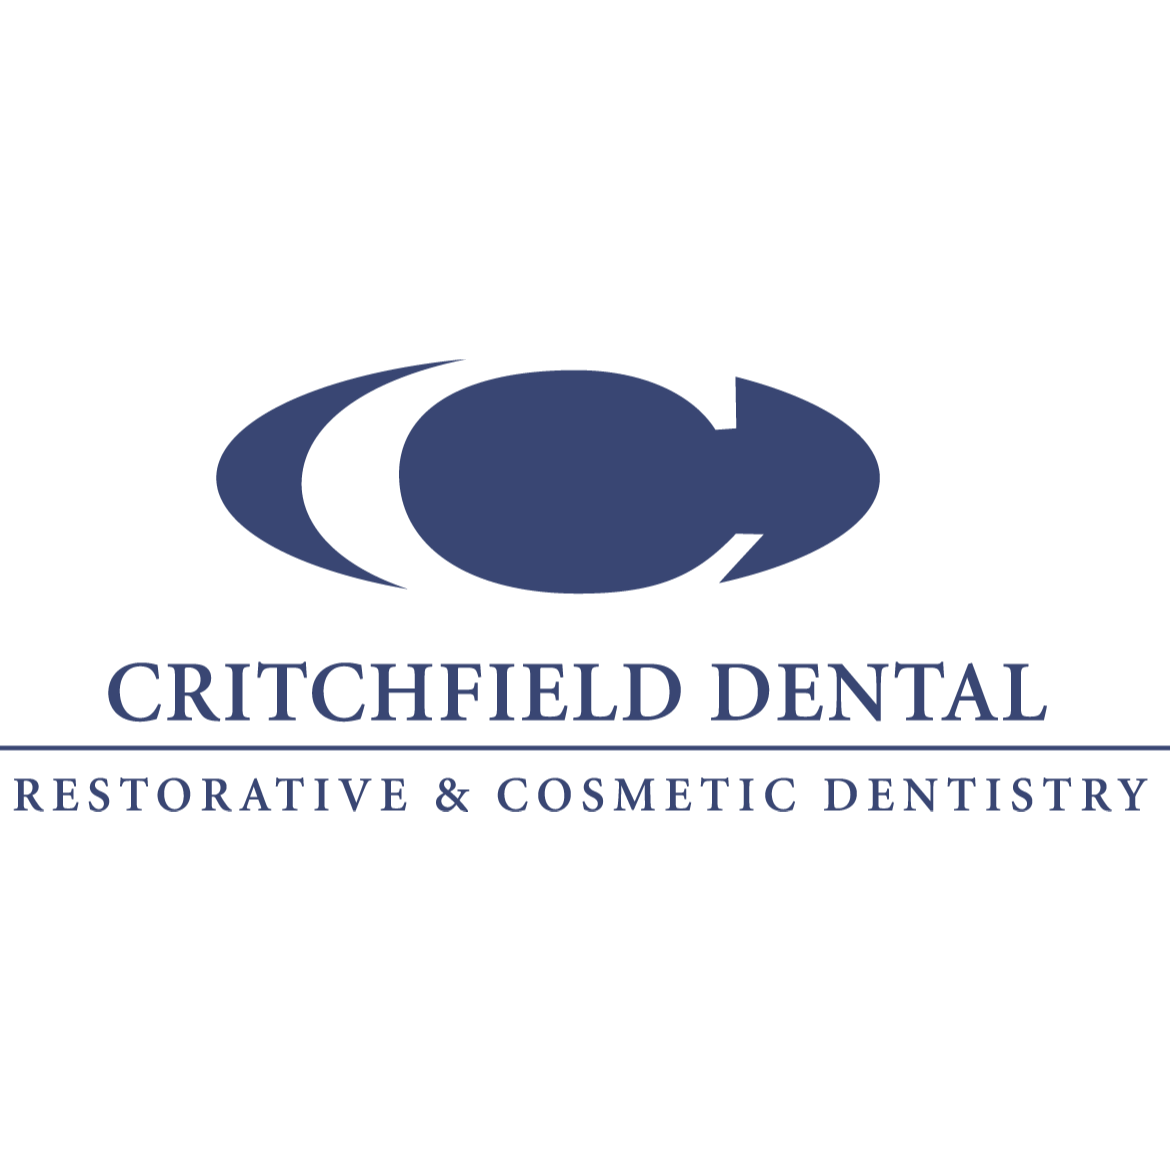 Palo Verde Smiles formerly known as Critchfield Dental